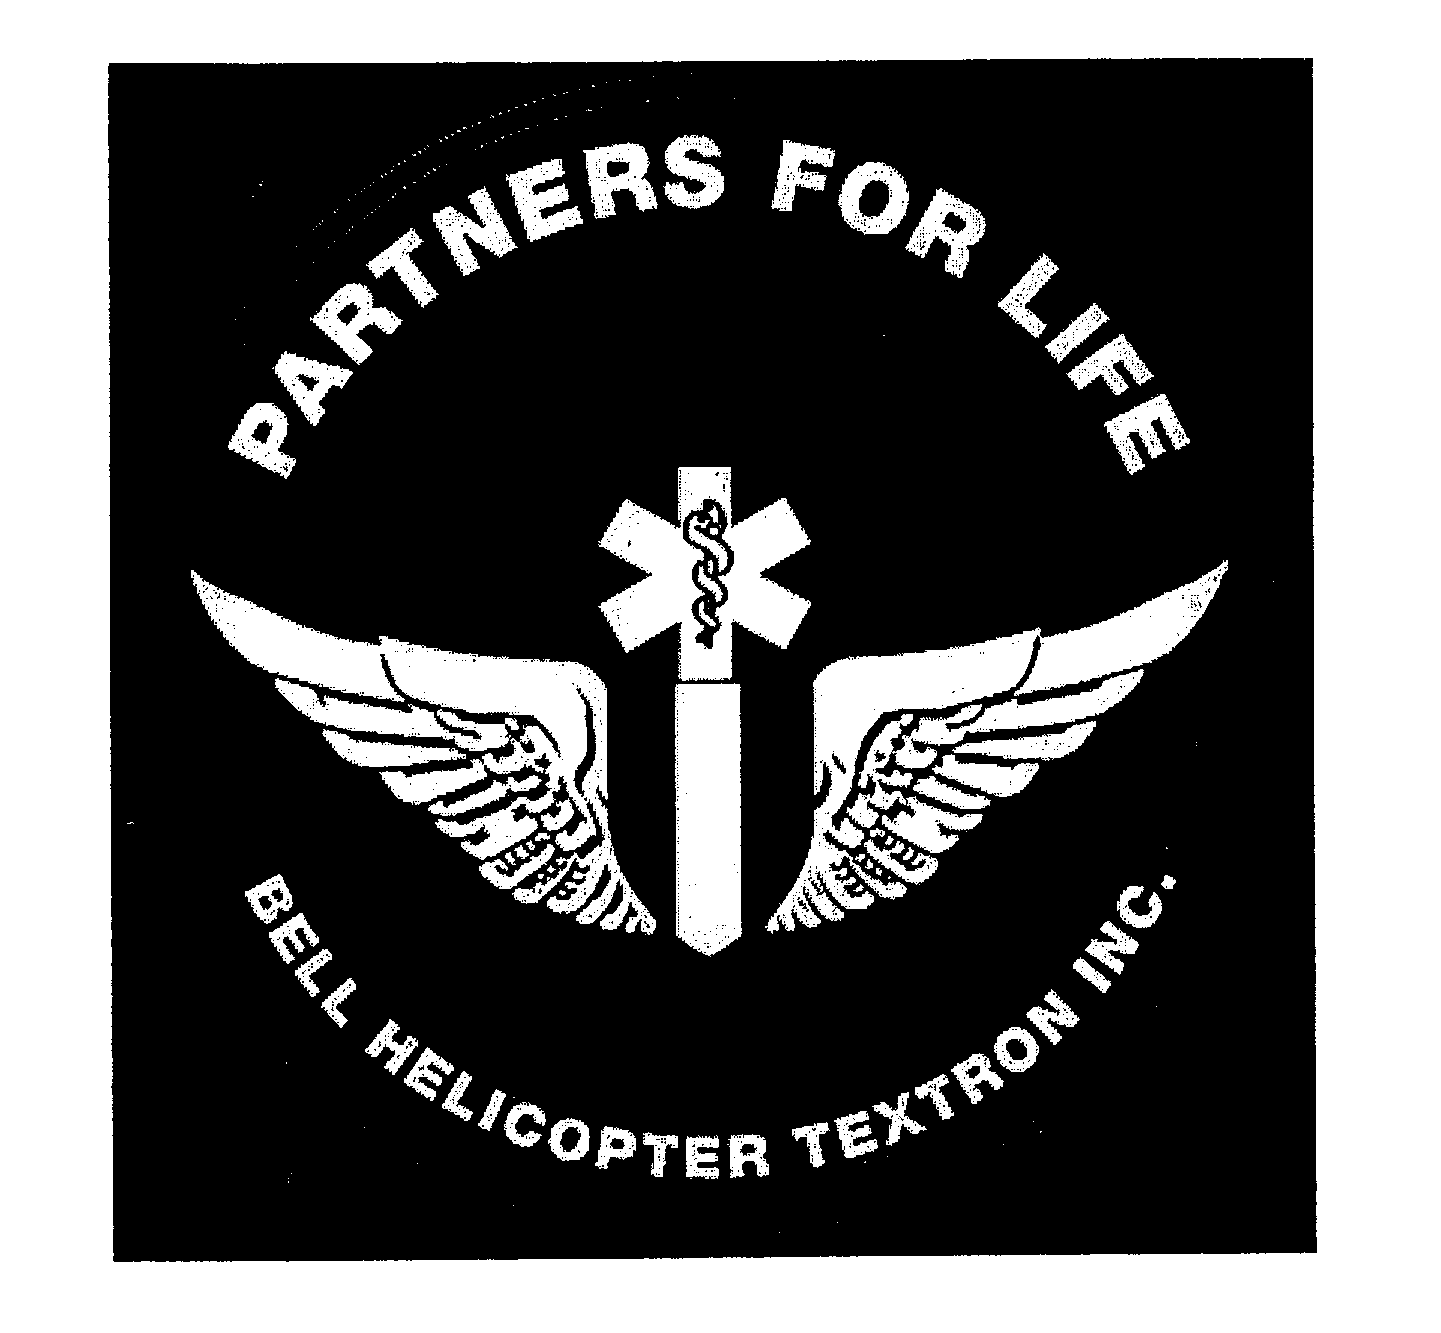  PARTNERS FOR LIFE BELL HELICOPTER TEXTRON INC.